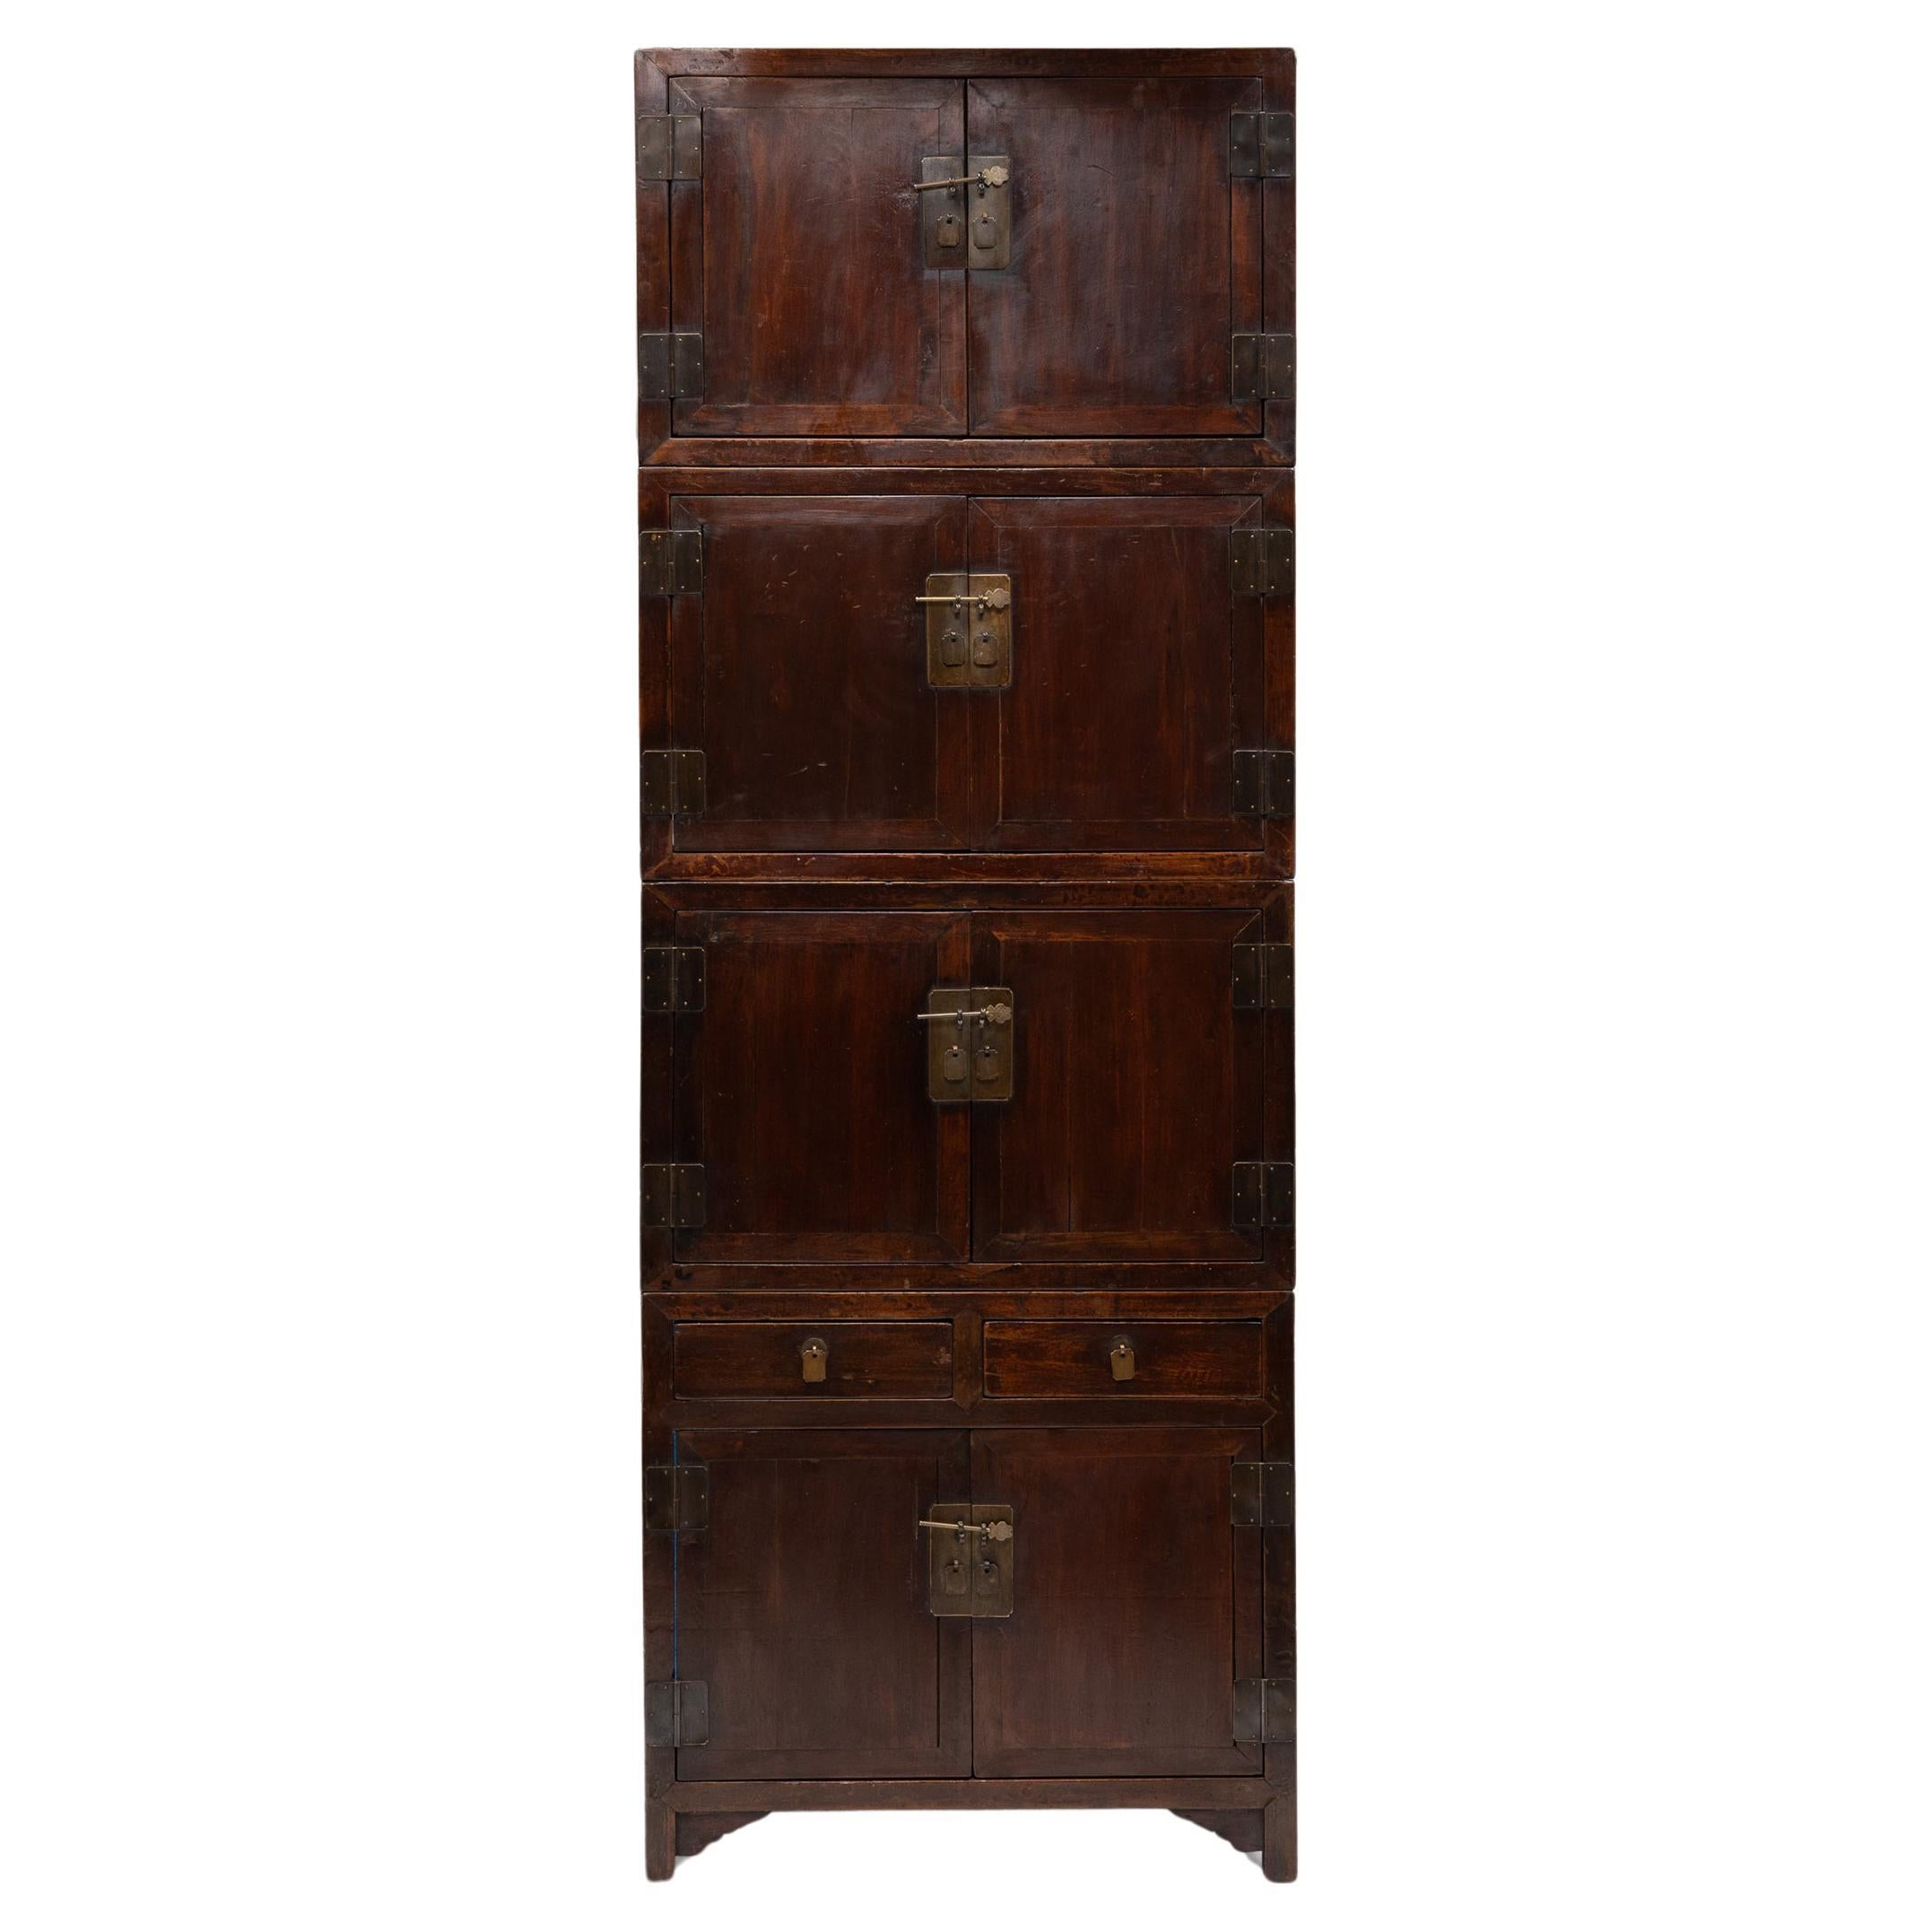 Four Piece Chinese Stacking Cabinet, c. 1930